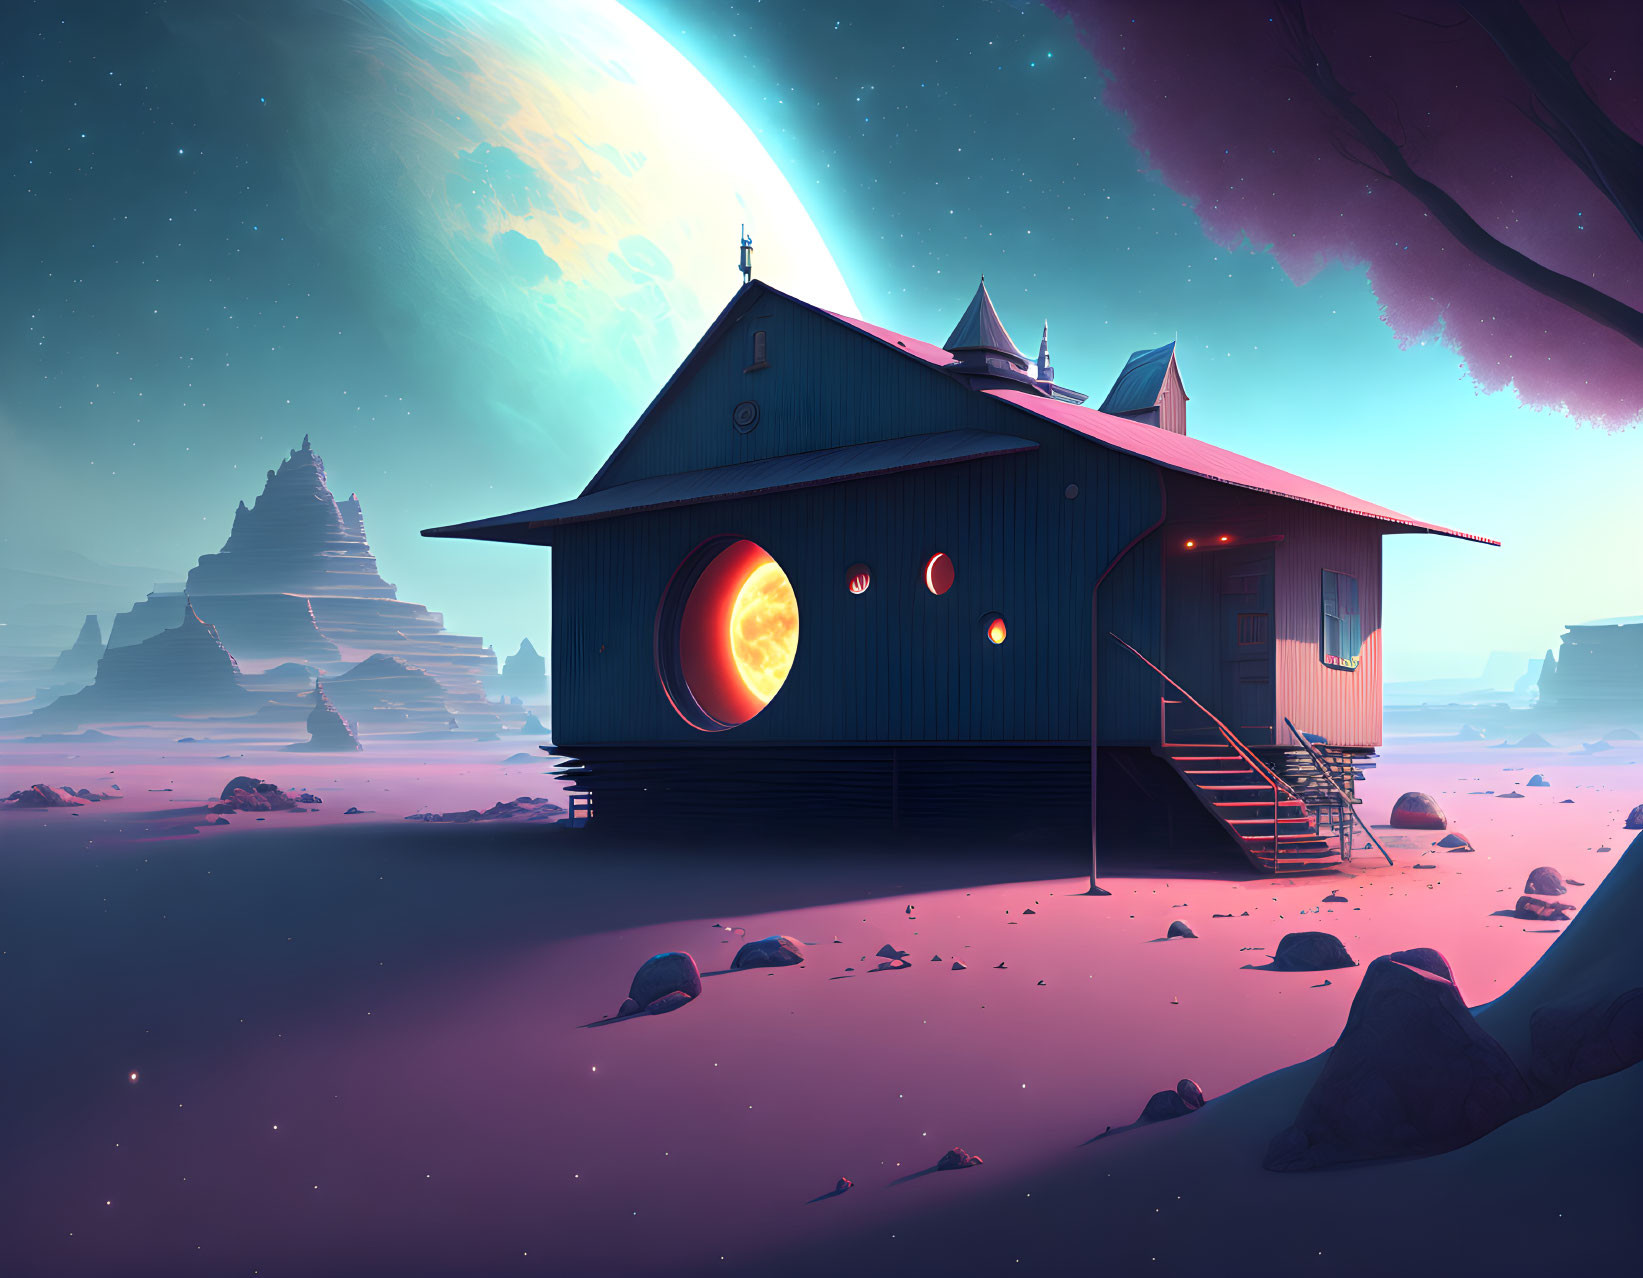 Solitary house on alien planet with ringed planet in purple landscape